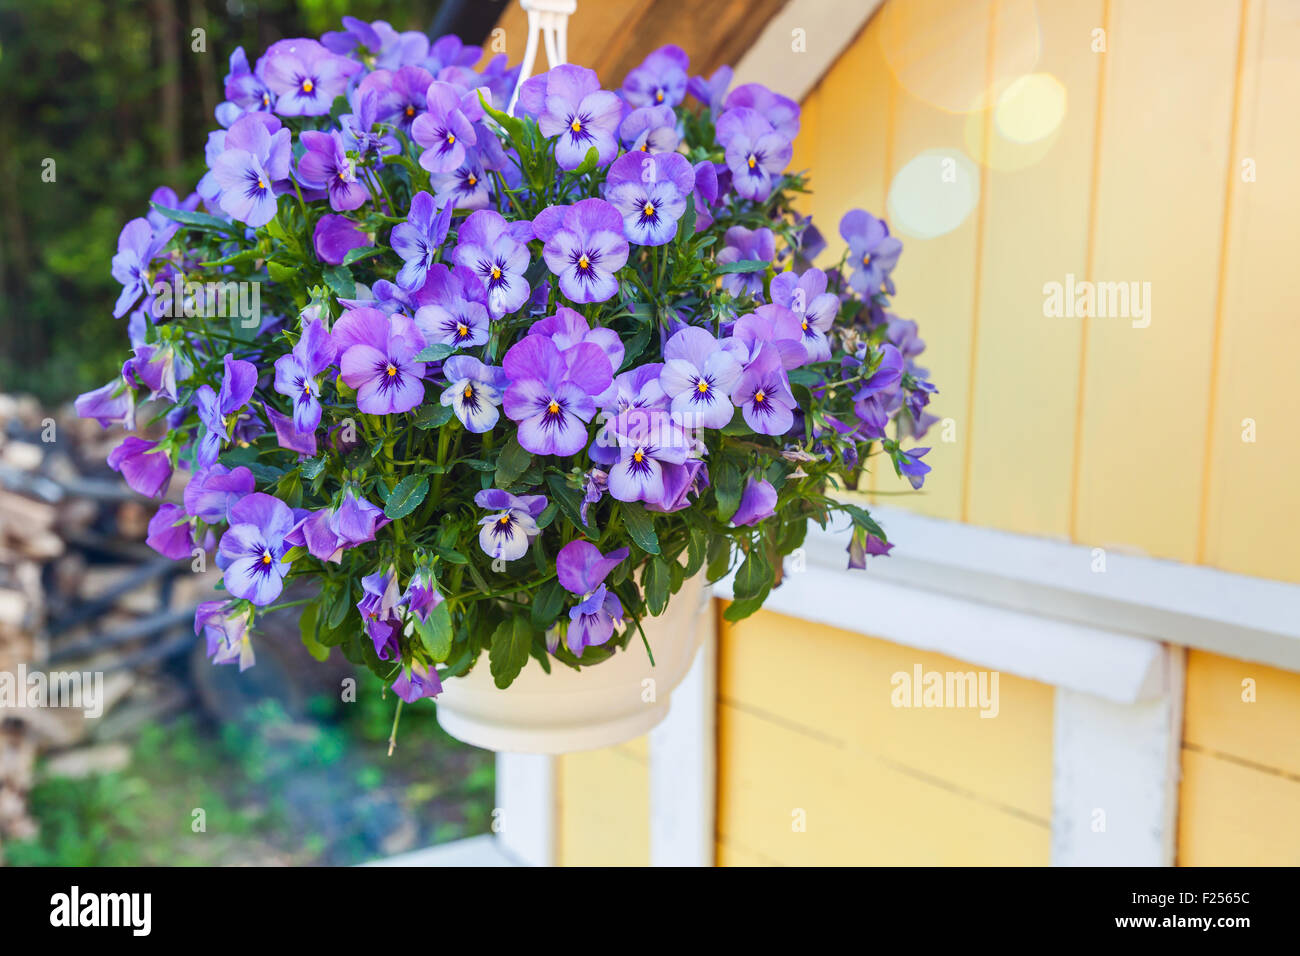 Blue pansies flowers grow in a hanging pot Stock Photo